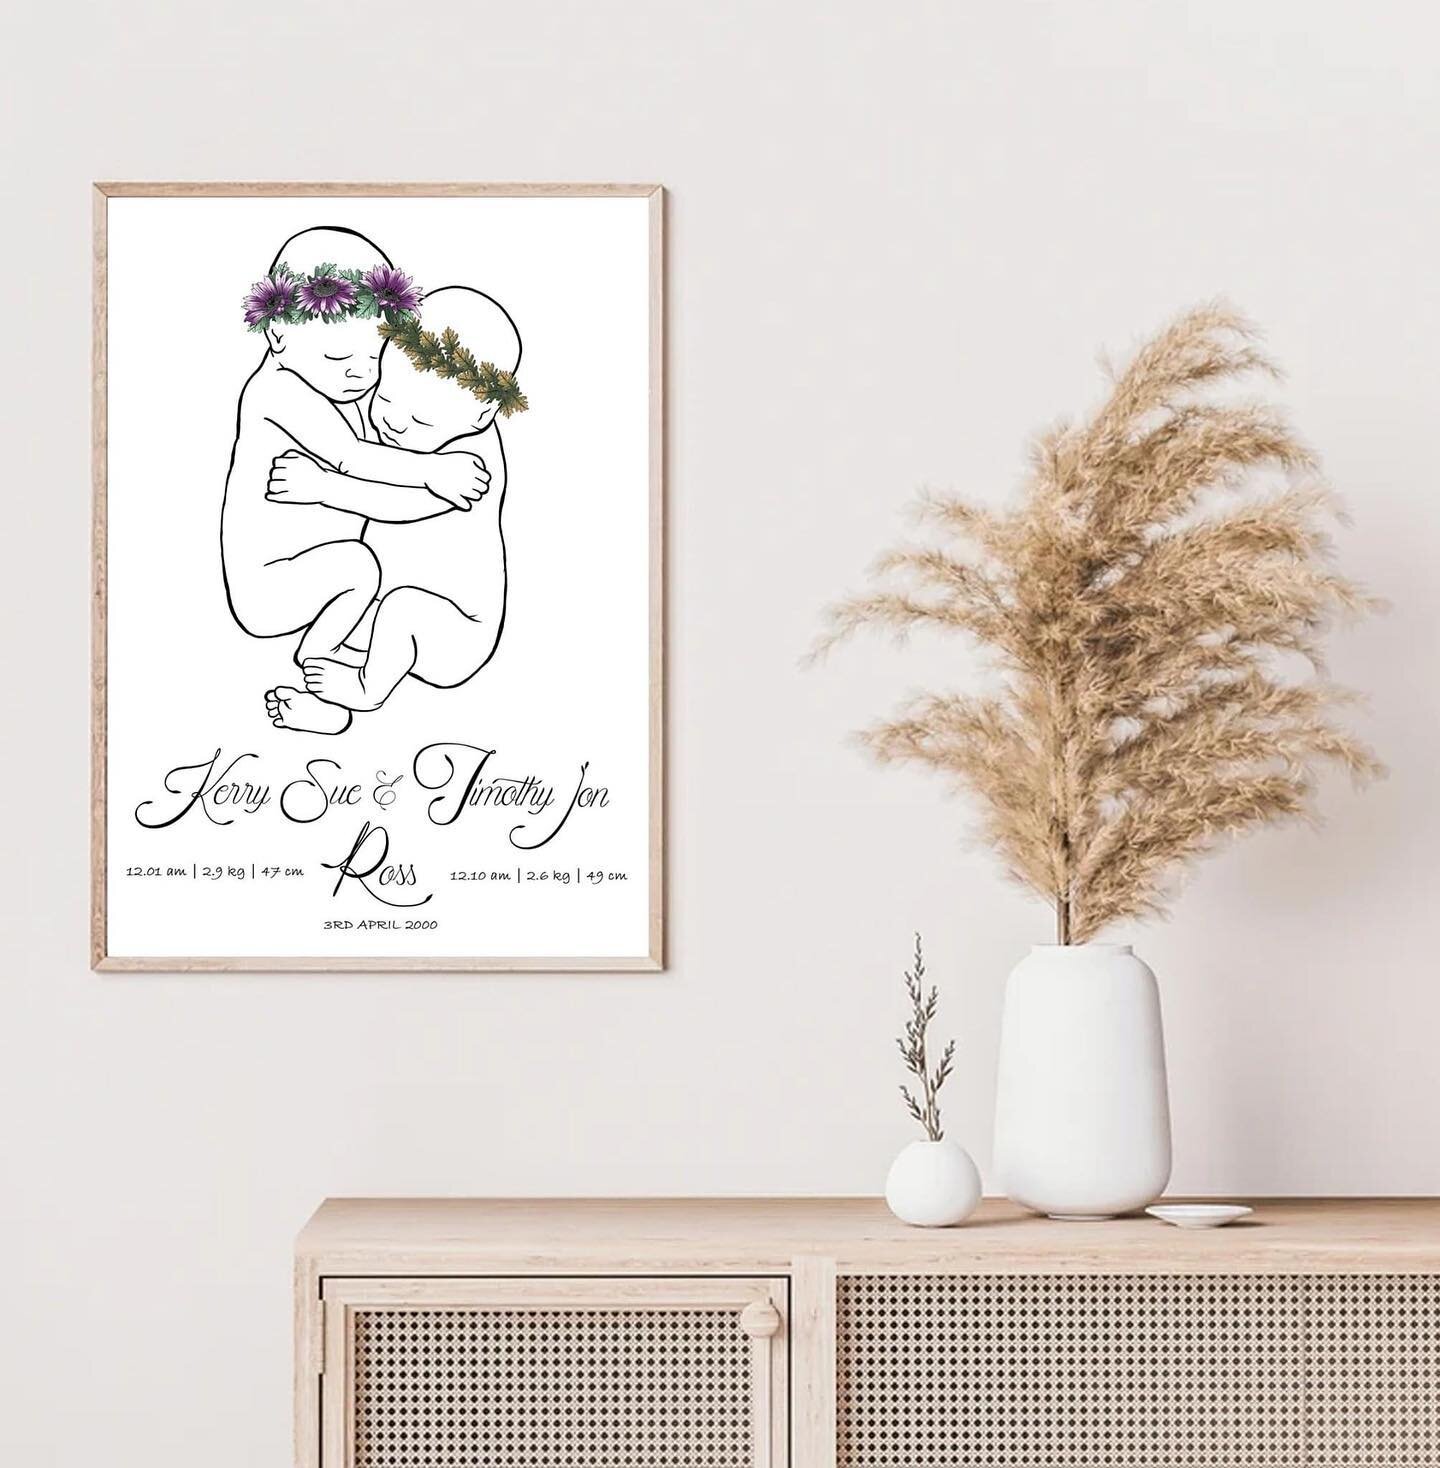 🌸IDYLLICBubs Baby Shower 

Book your Baby Shower Garland during July ~ Sept and receive a gorgeous custom @idyllicbubs digital newborn birth poster 

Choose from @idyllicbubs flower crown or leaf crown design &amp; optional upgrade at own expense fr